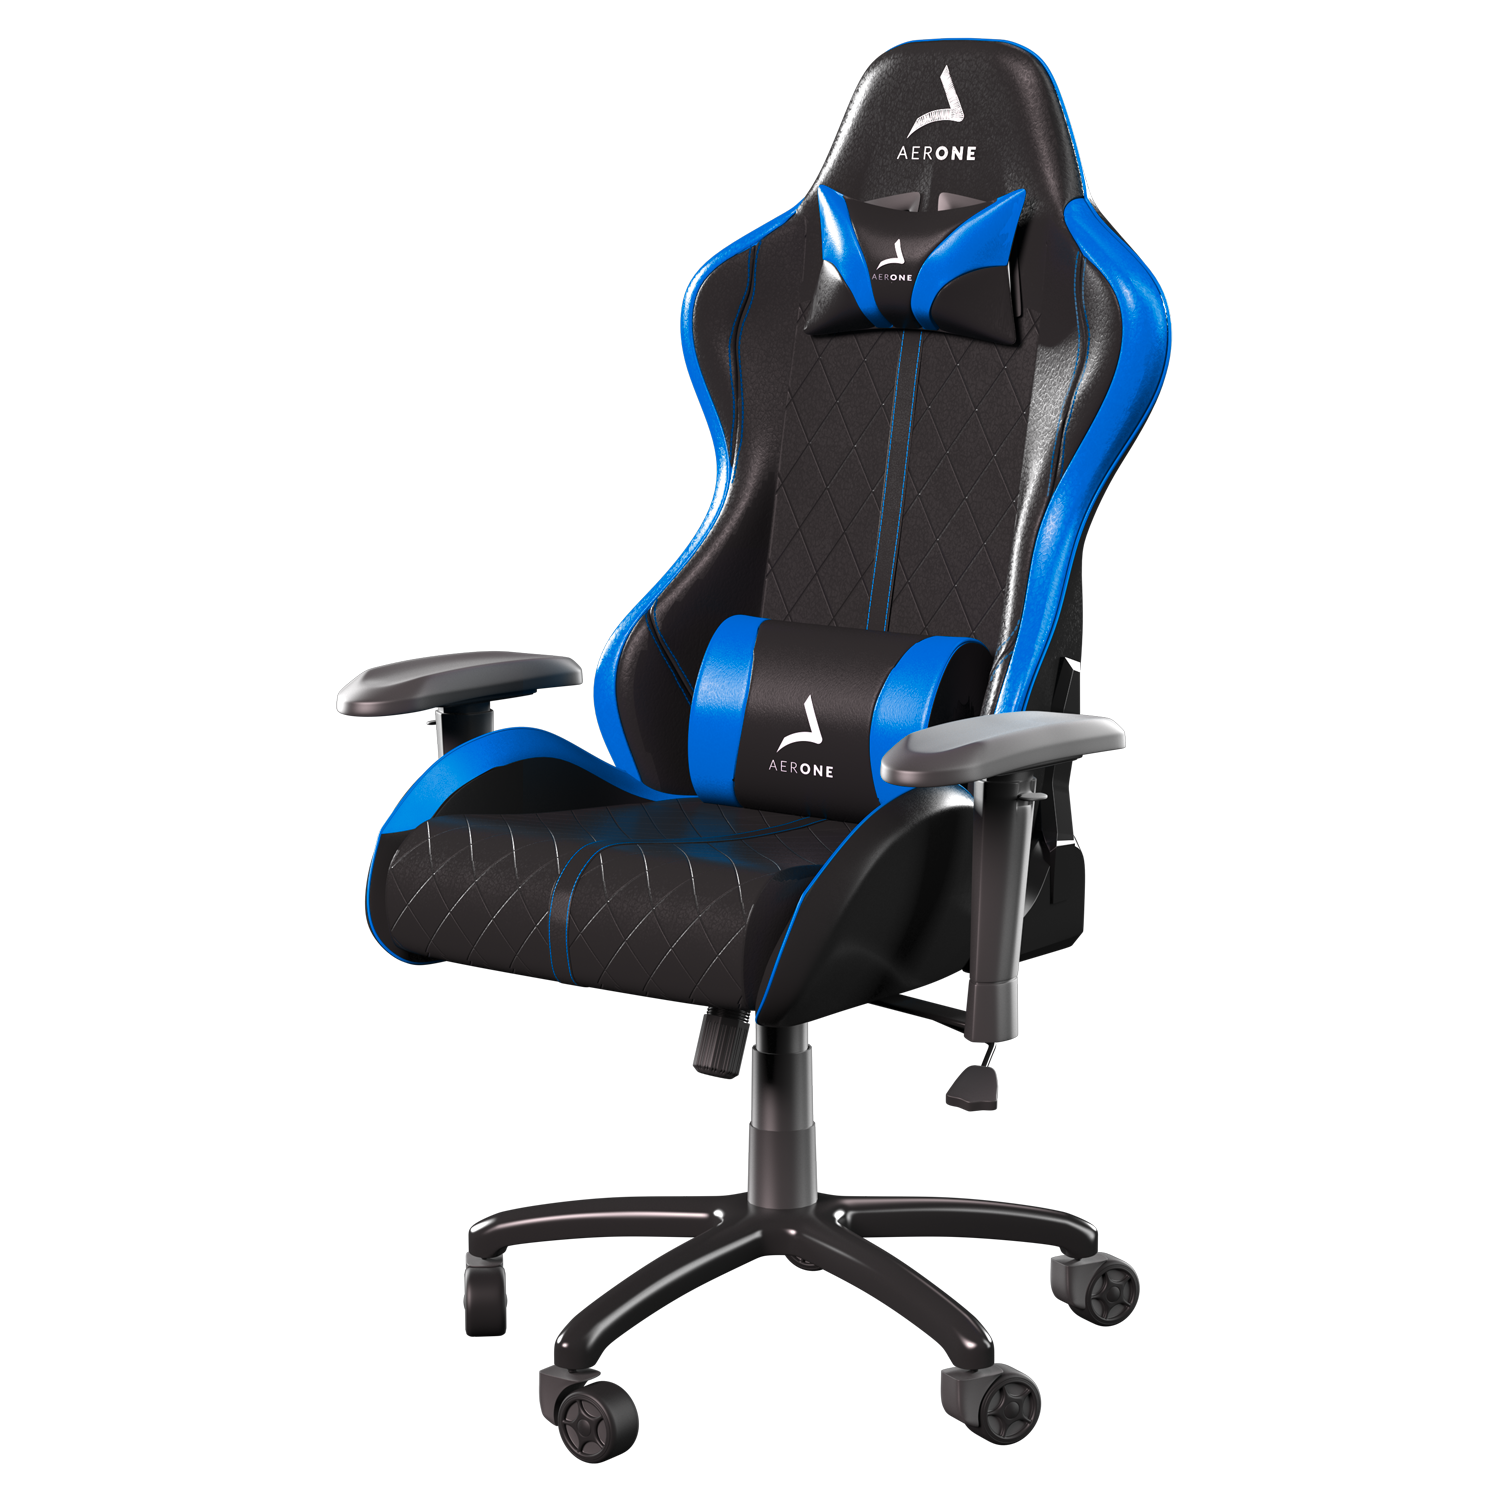 Chaise gaming : les meilleurs chaises pour gamers